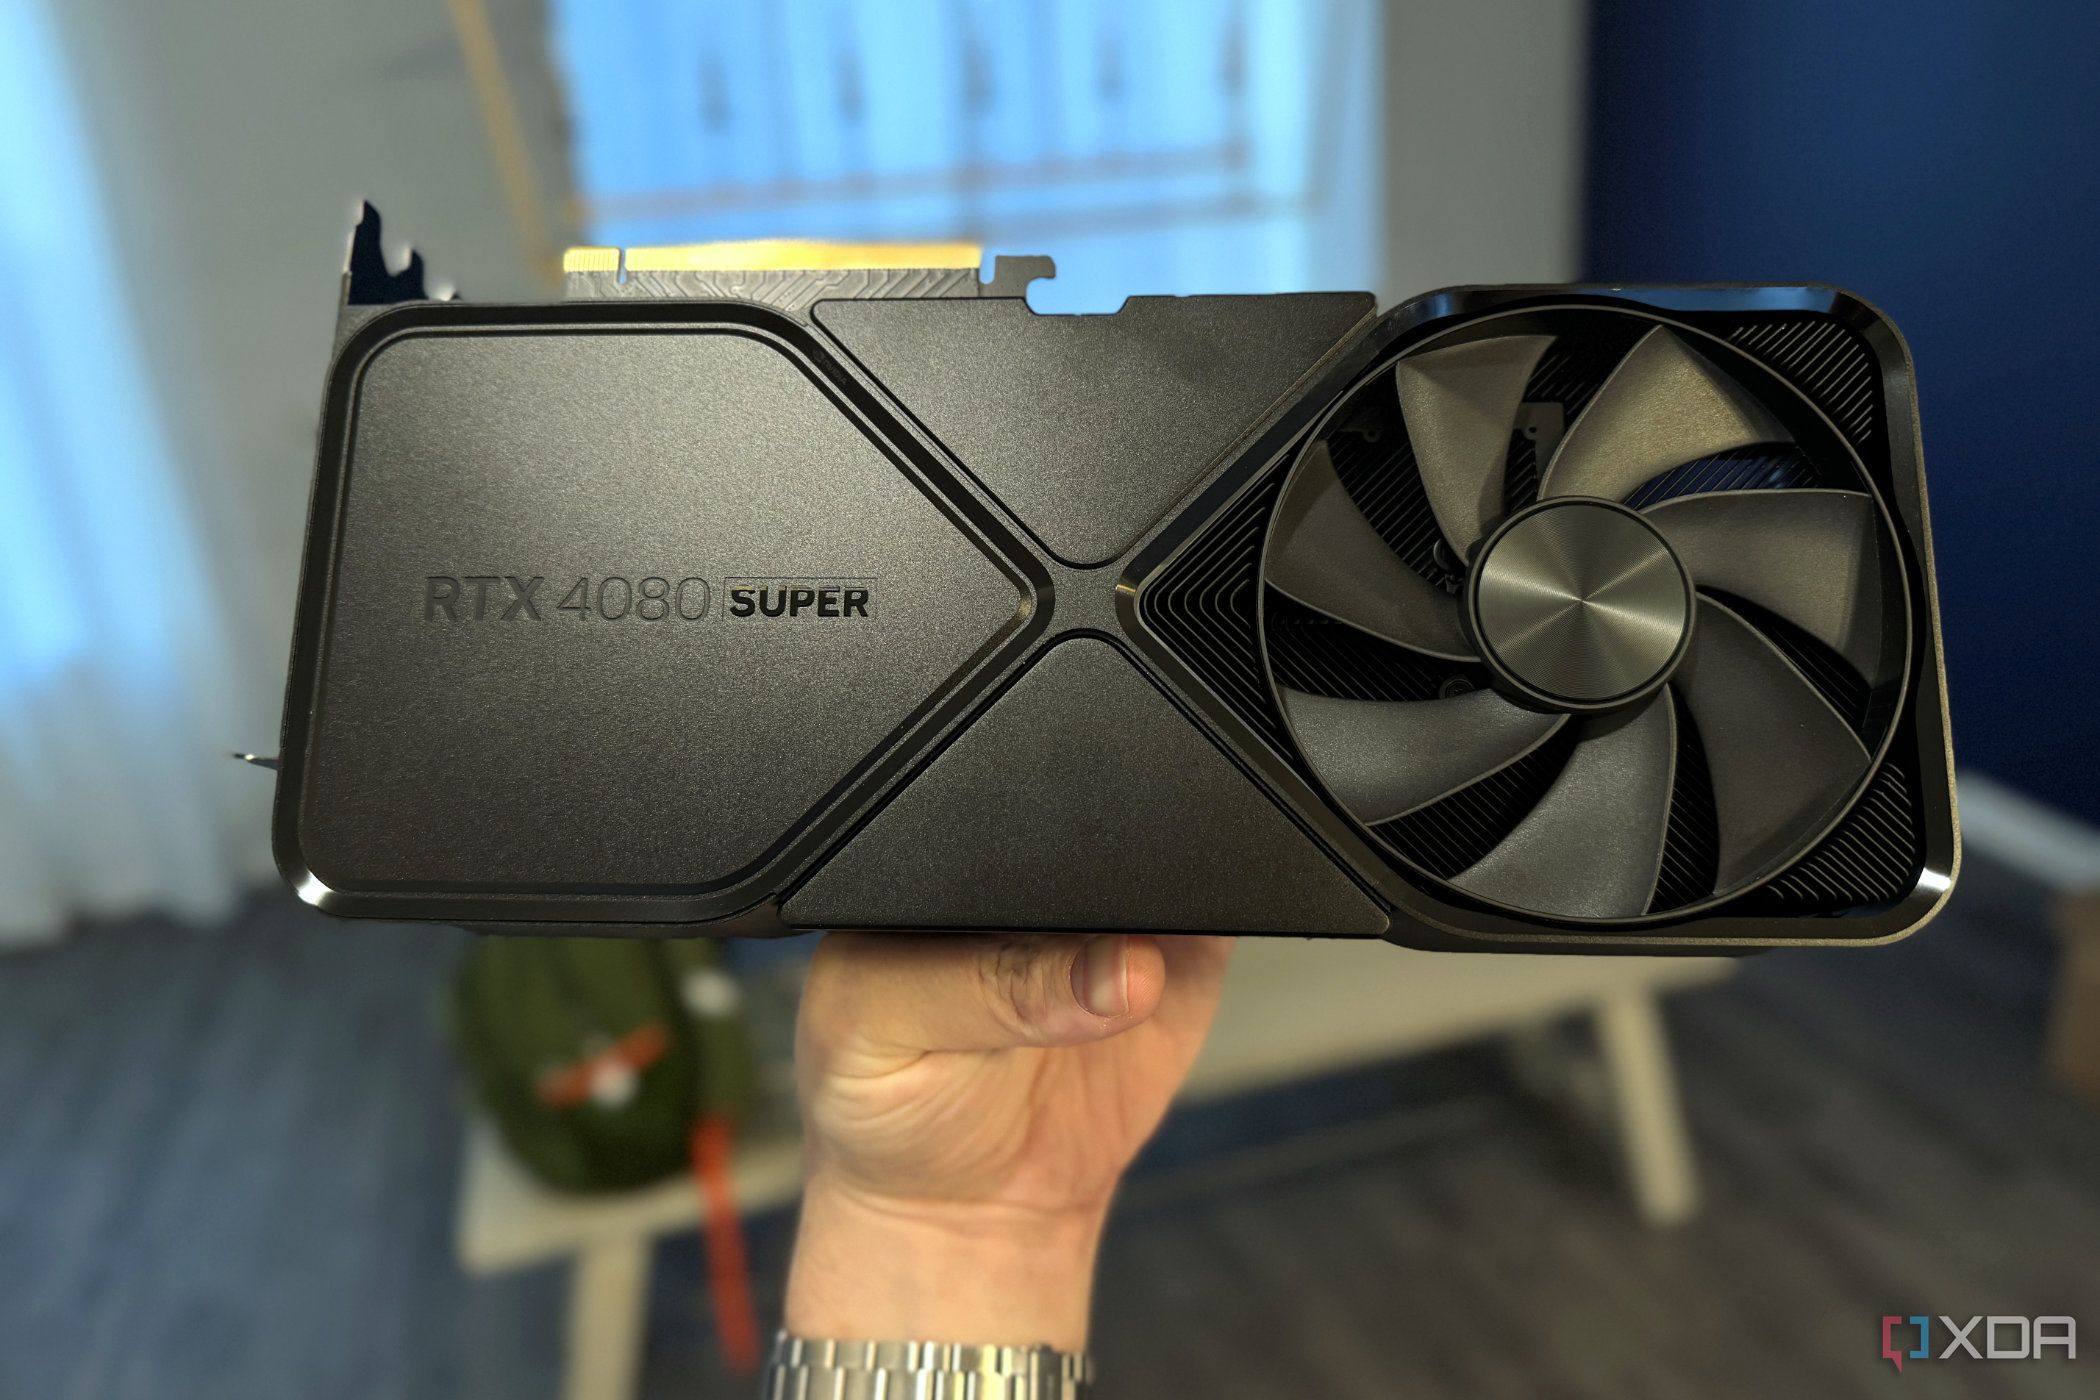 nvidia geforce rtx 4080 super fe held in hand in a dining room